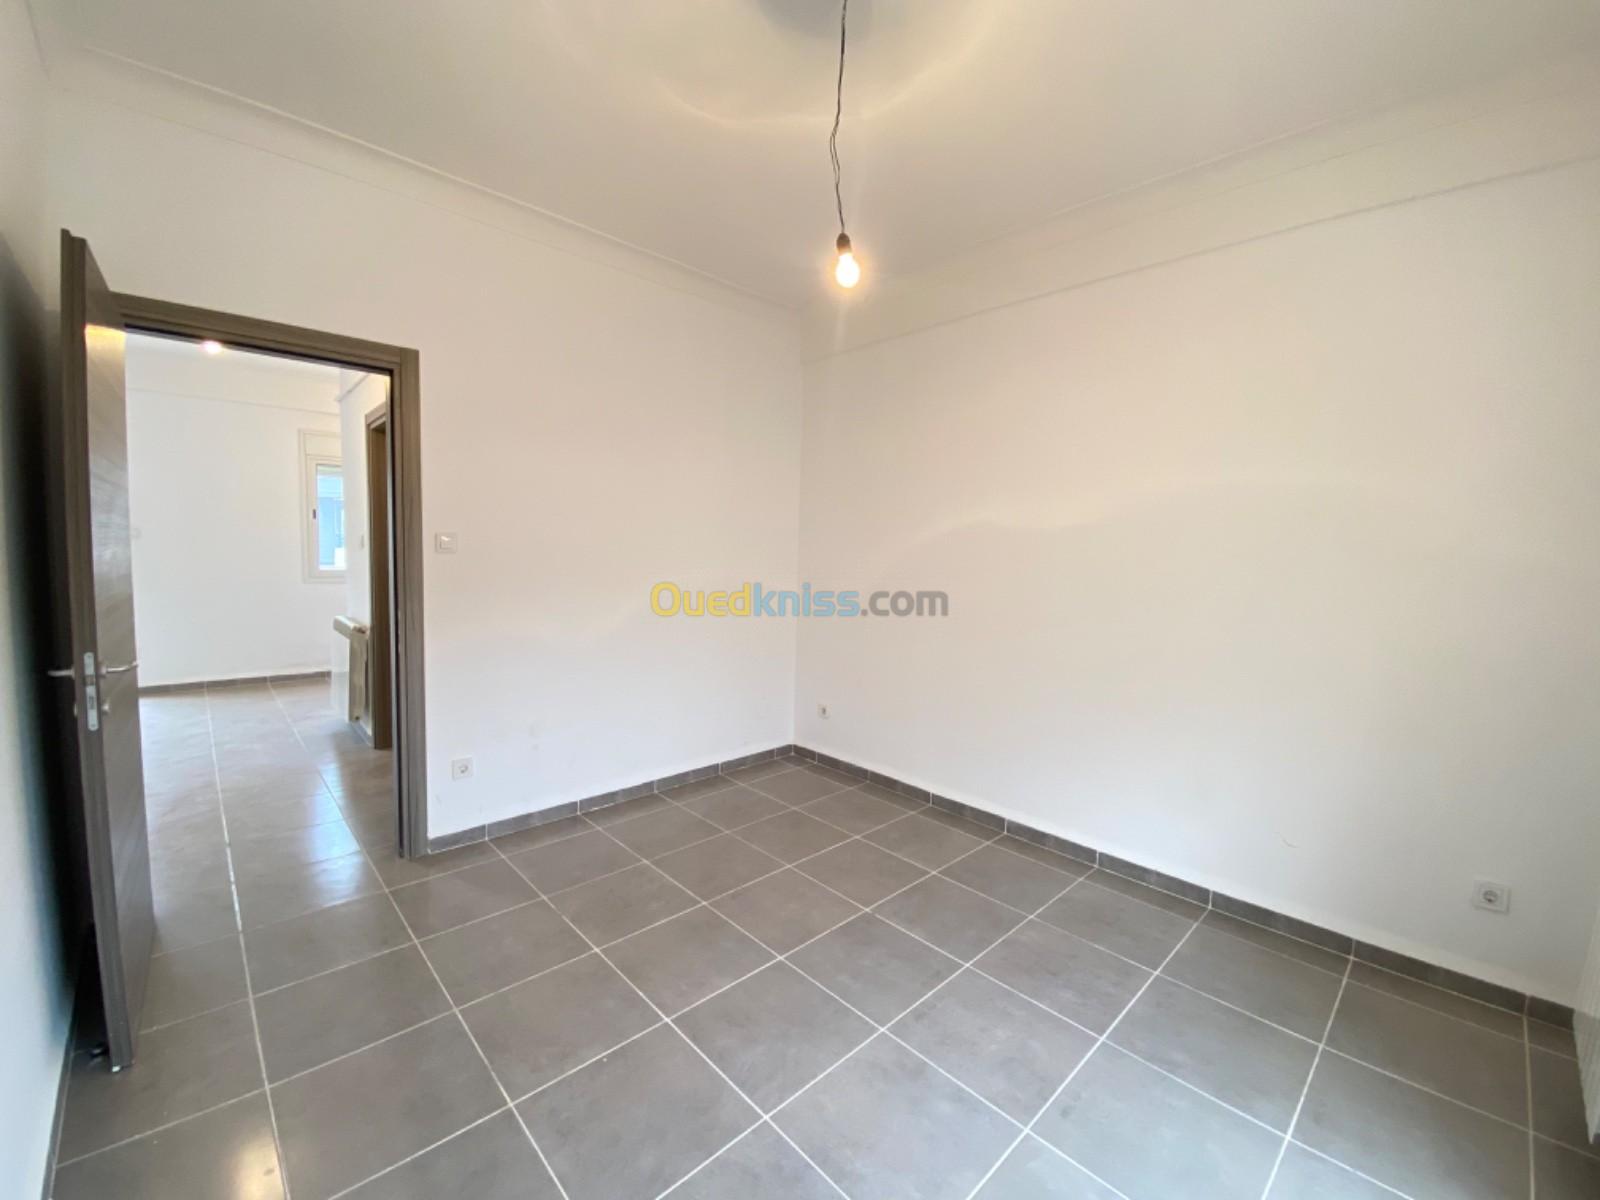 Vente Appartement F2 Alger Ouled fayet